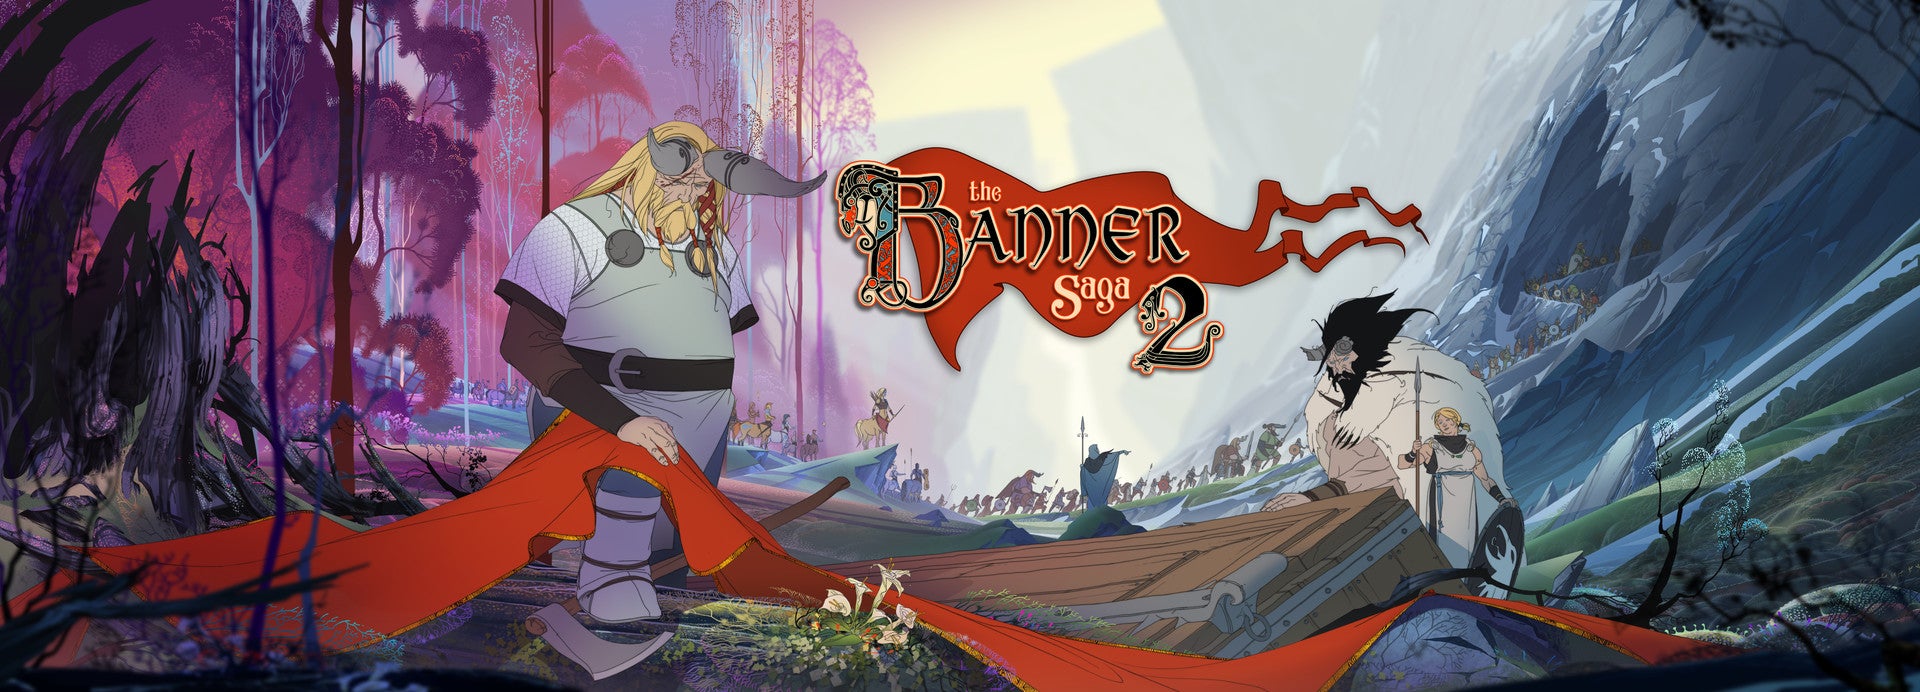 Image for The Banner Saga 2 arrives on PS4 and Xbox One in July